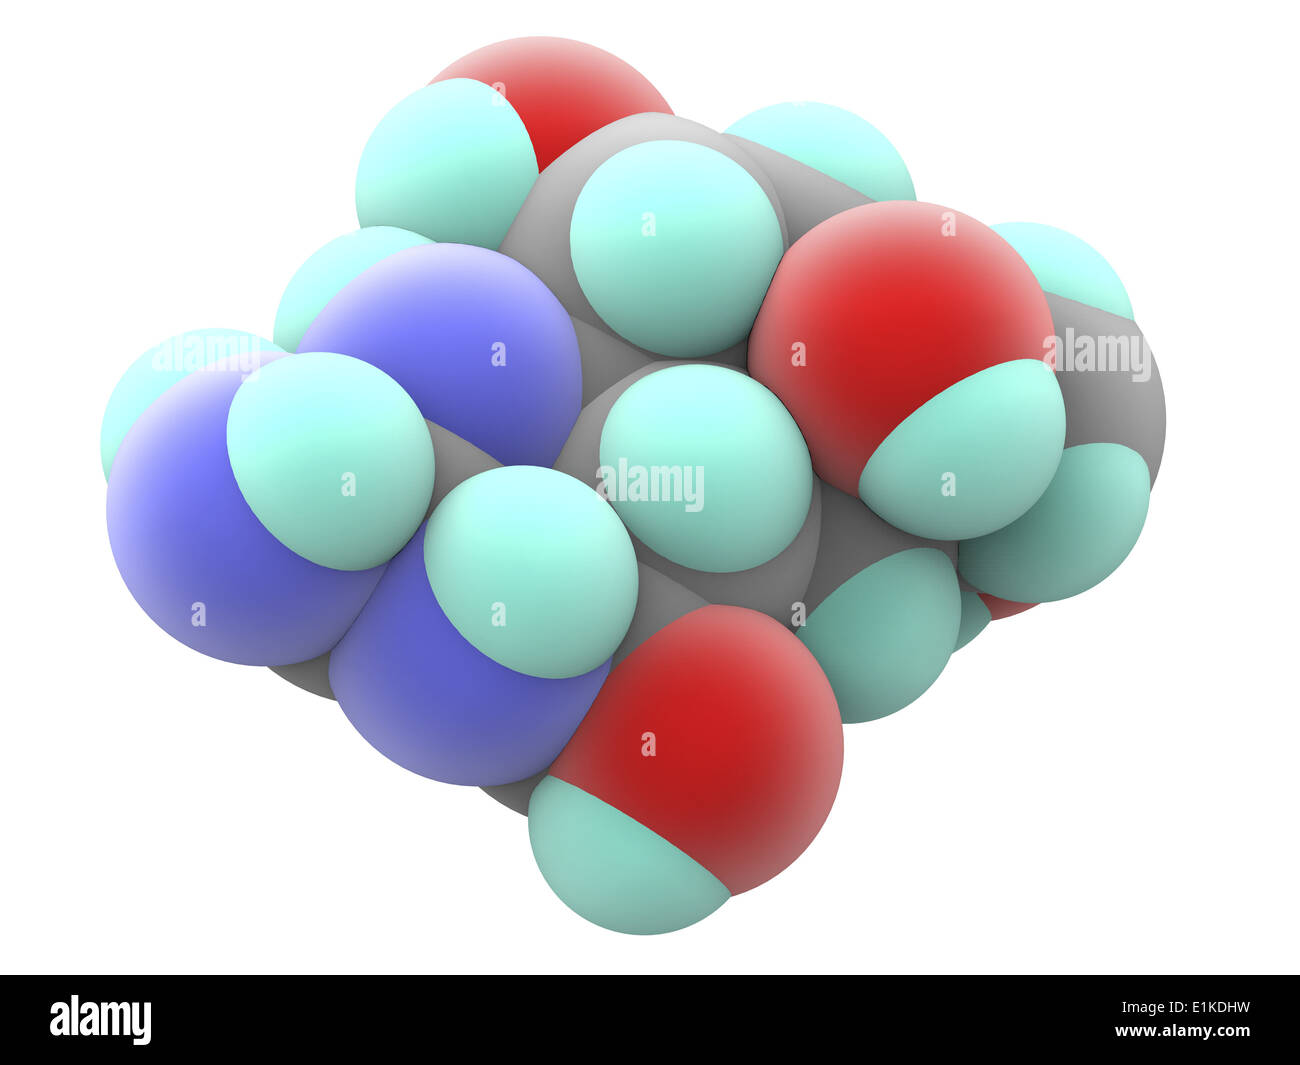 Tetrodotoxin (TTX) molecular model Potent neurotoxin without antidote occurring in several marine species among them the Stock Photo